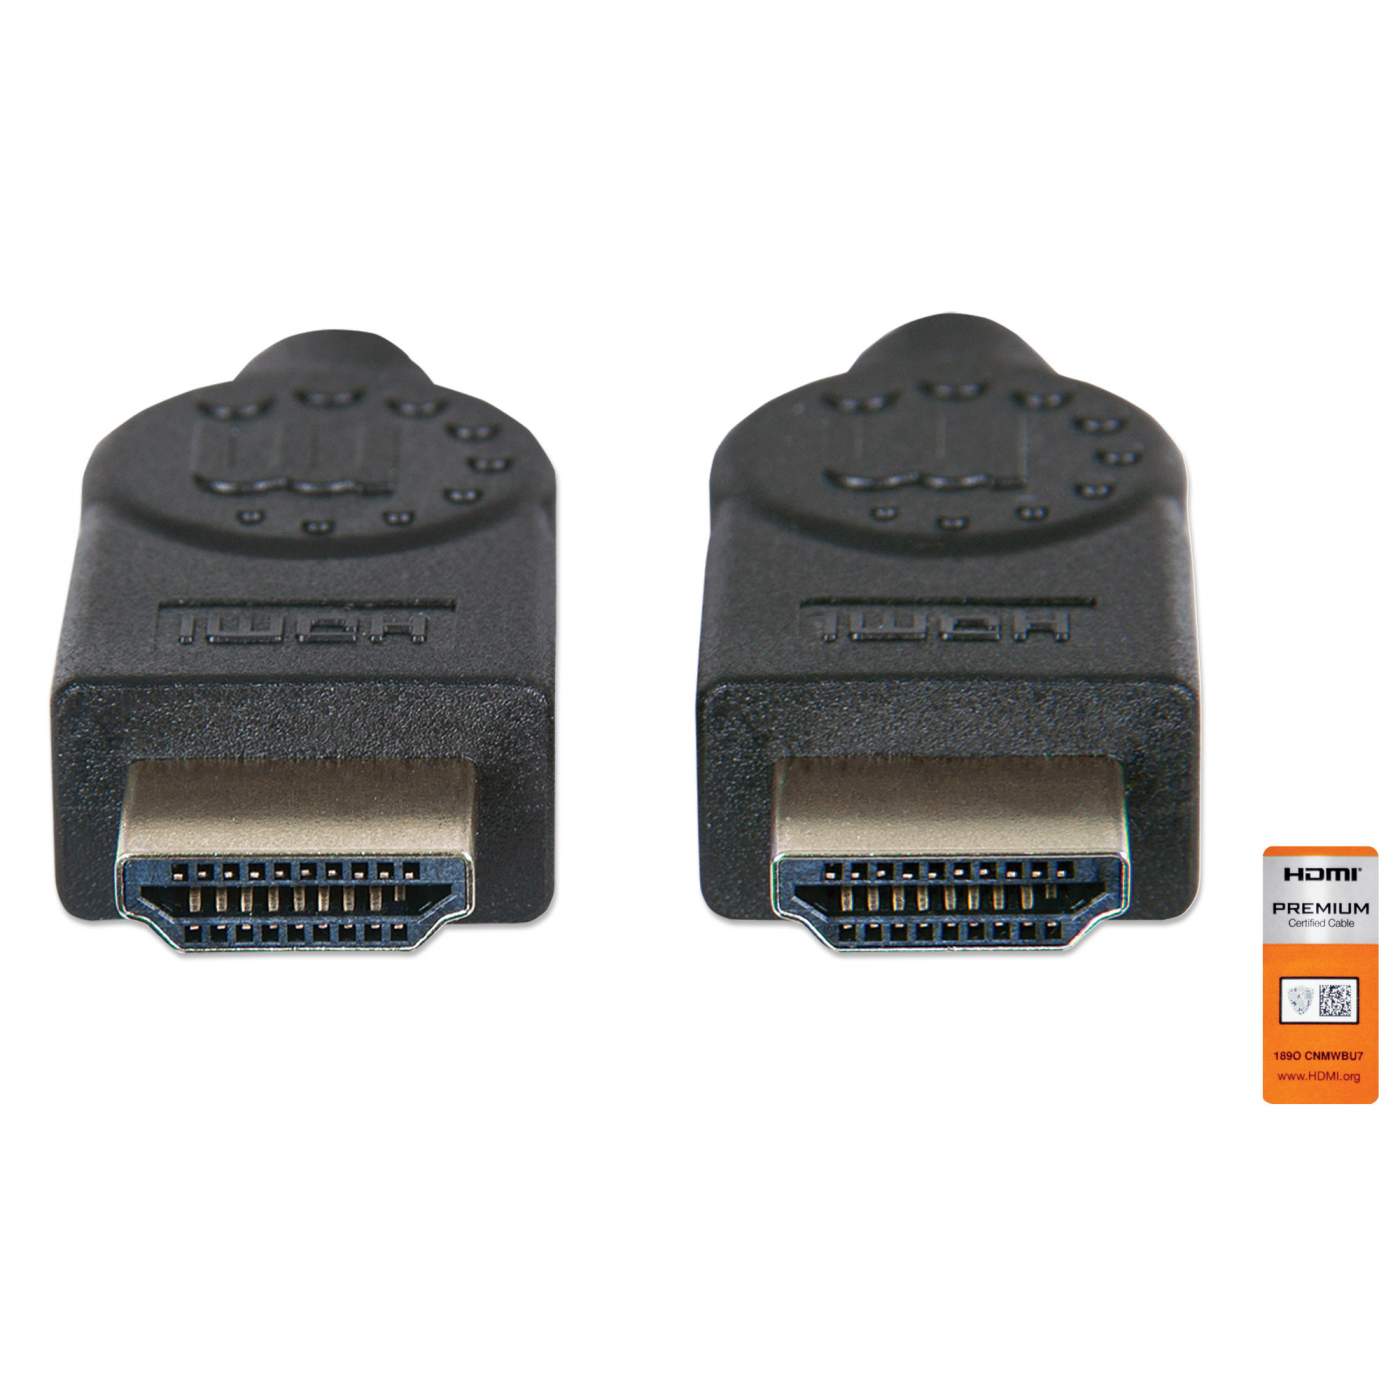 Certified Premium High Speed HDMI Cable with Ethernet Image 3